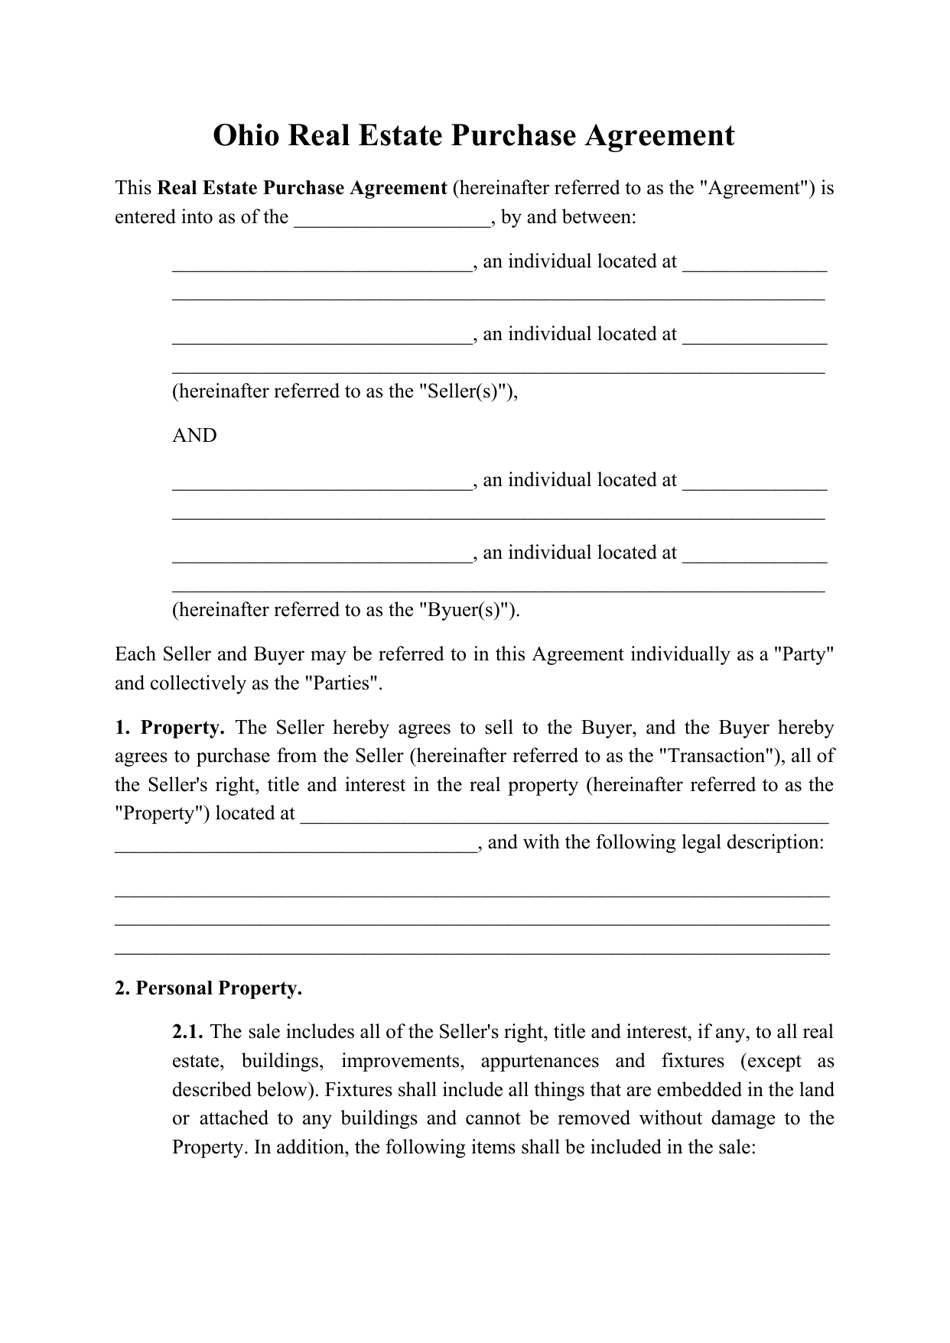 ohio-real-estate-purchase-agreement-template-fill-out-sign-online